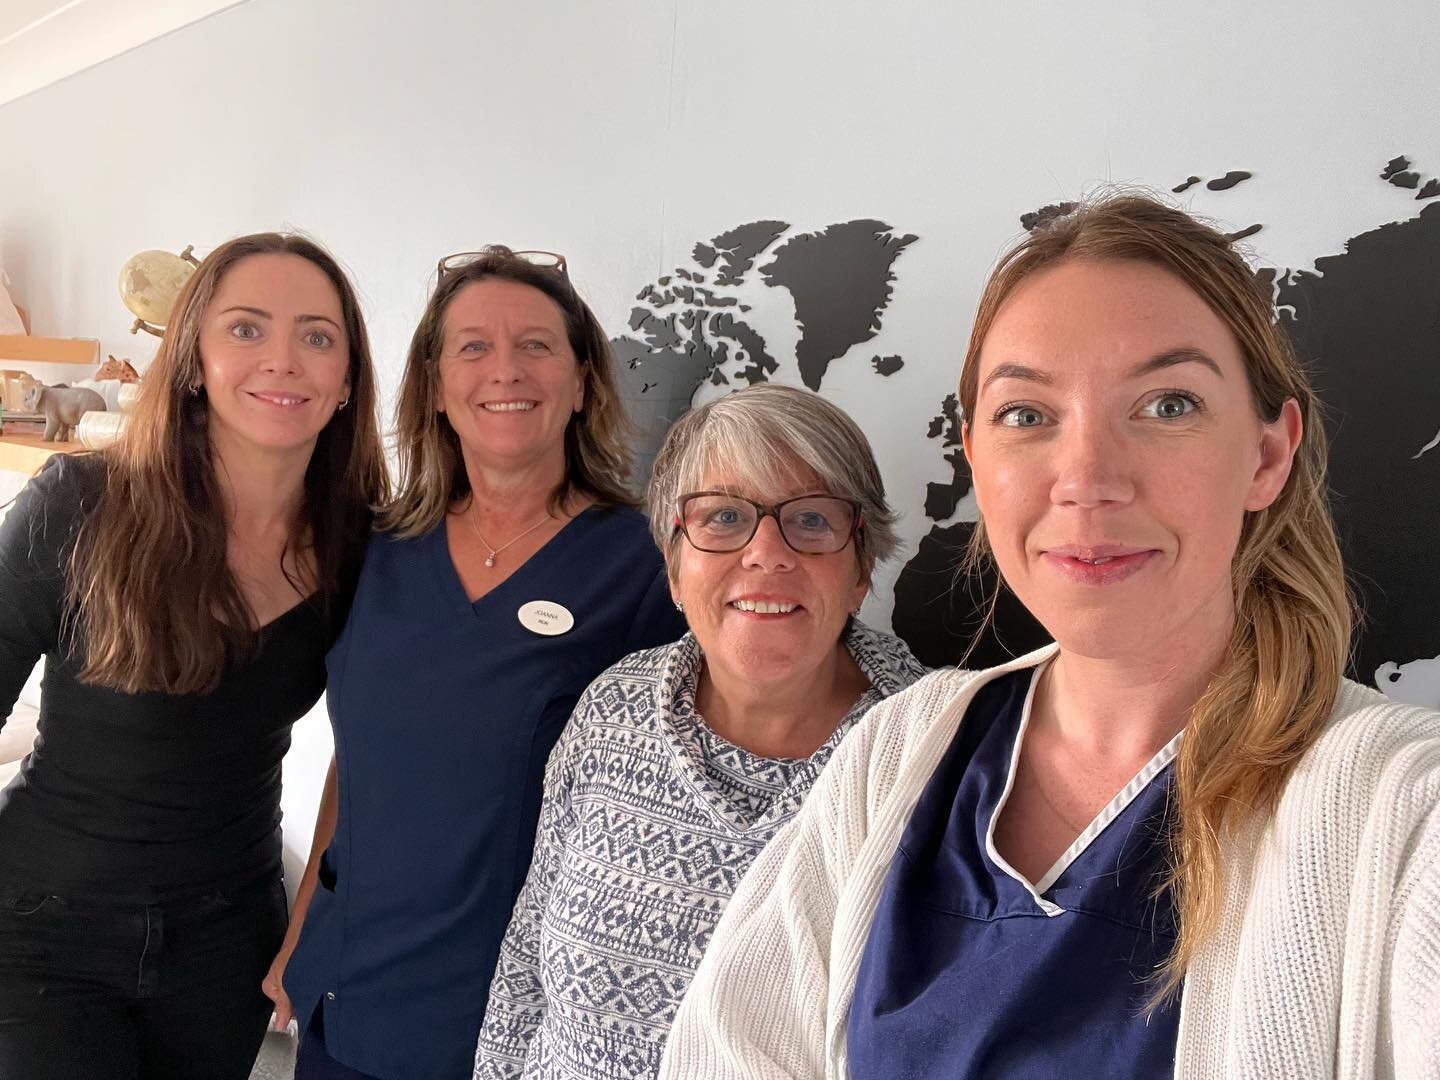 Lovey catch up with our fellow nurses @hearagainexmouth.

We meet regularly to share and discuss latest guidelines and evidence and ensure we are able to offer the most effective service to all of our lovely patients. We are passionate about providin